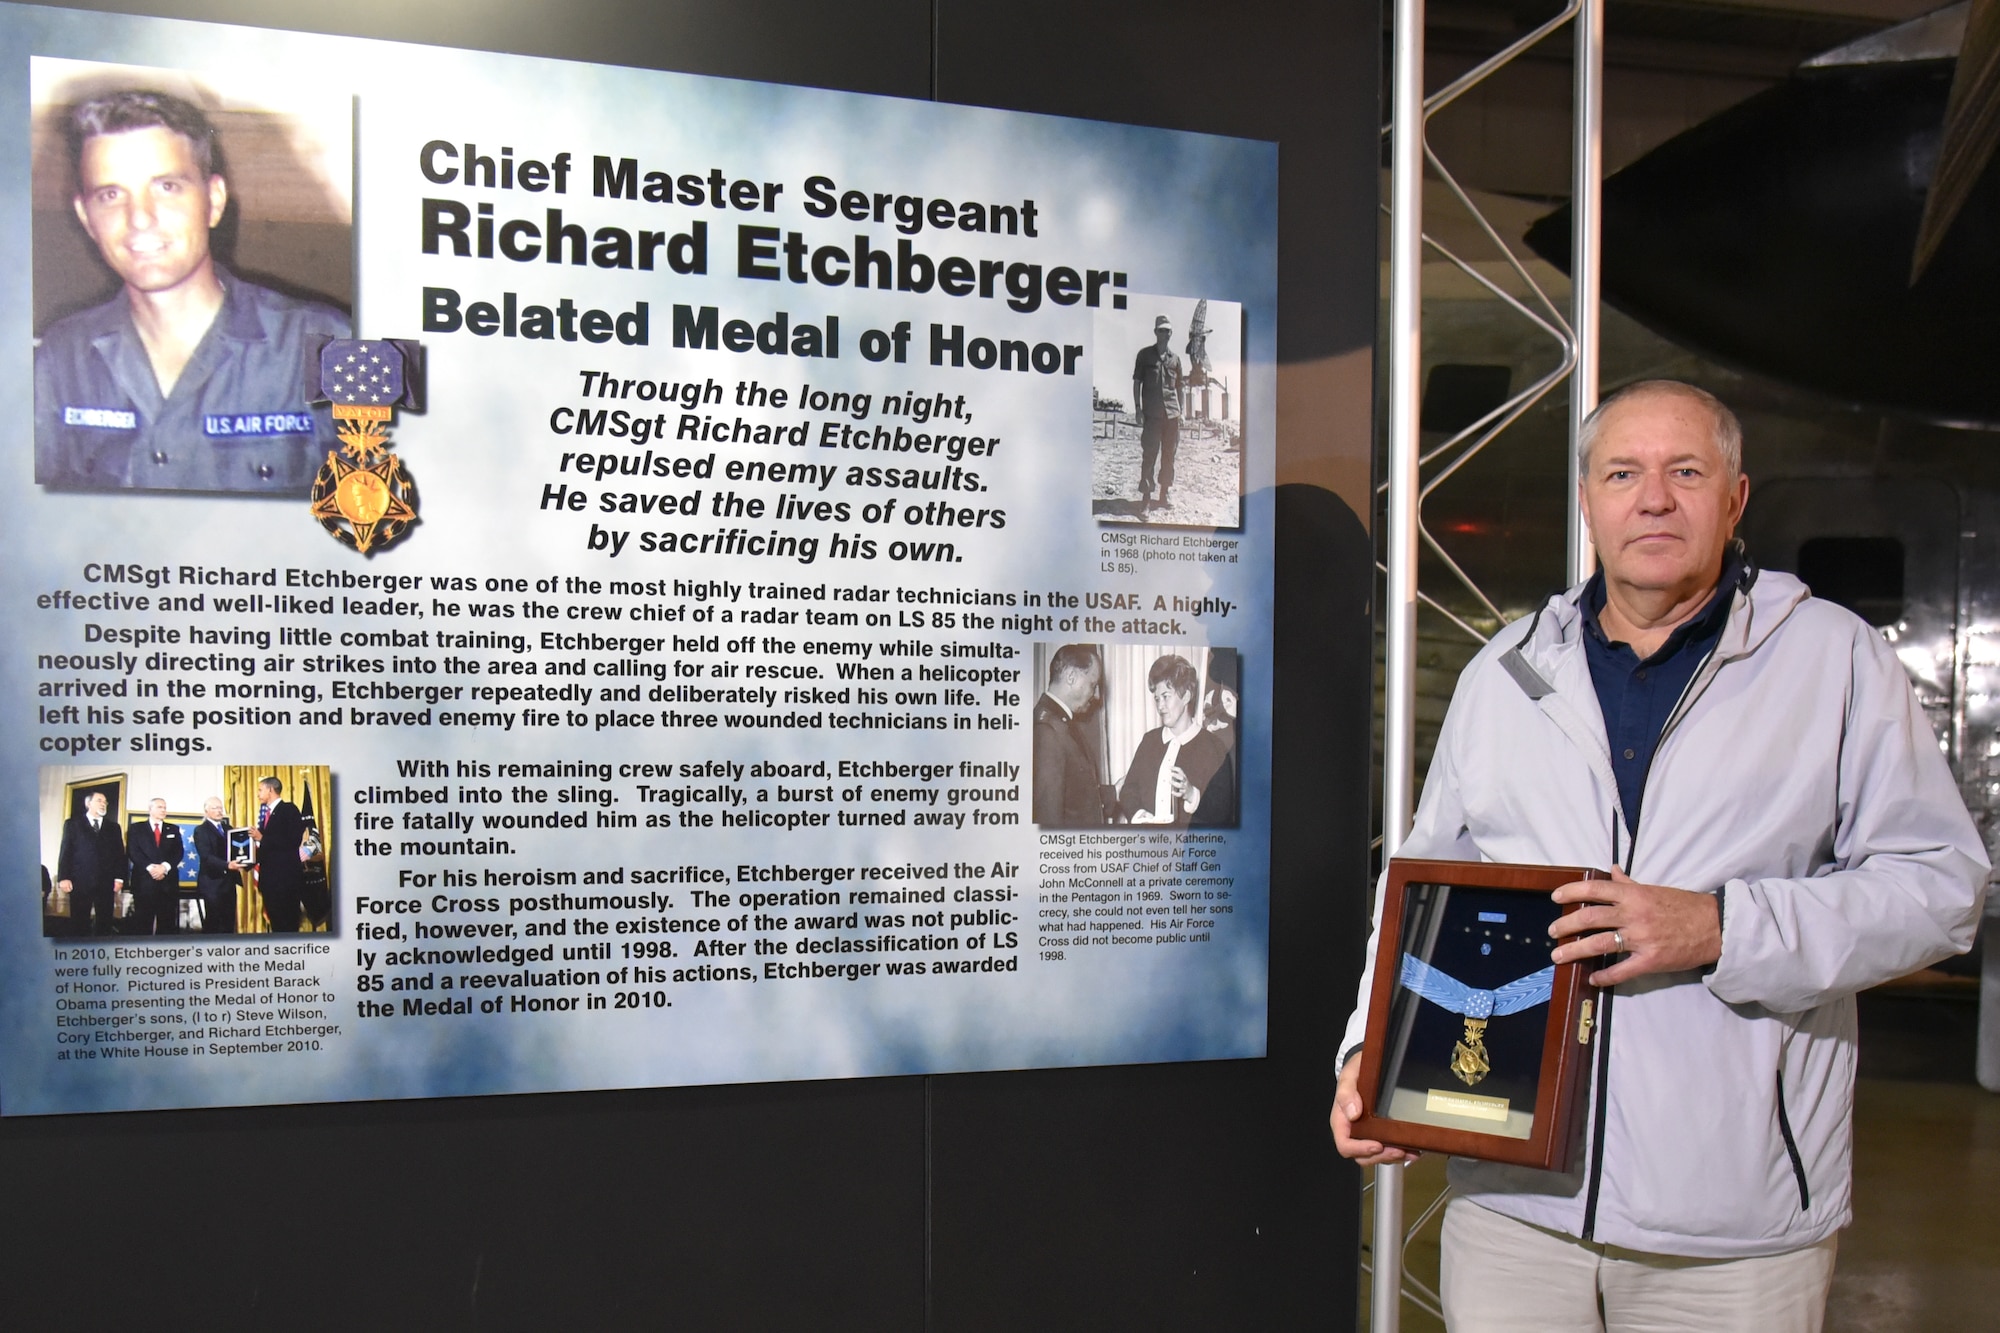 Cory Etchberger, a son of CMSgt. Richard Etchberger, visited the National Museum of the U.S. Air Force on November 15, 2017. His father saved the lives of others by sacrificing his own at LS 85 in 1968. After the declassification of LS 85 and a reevaluation of his actions, Etchberger was awarded the Medal of Honor in 2010.